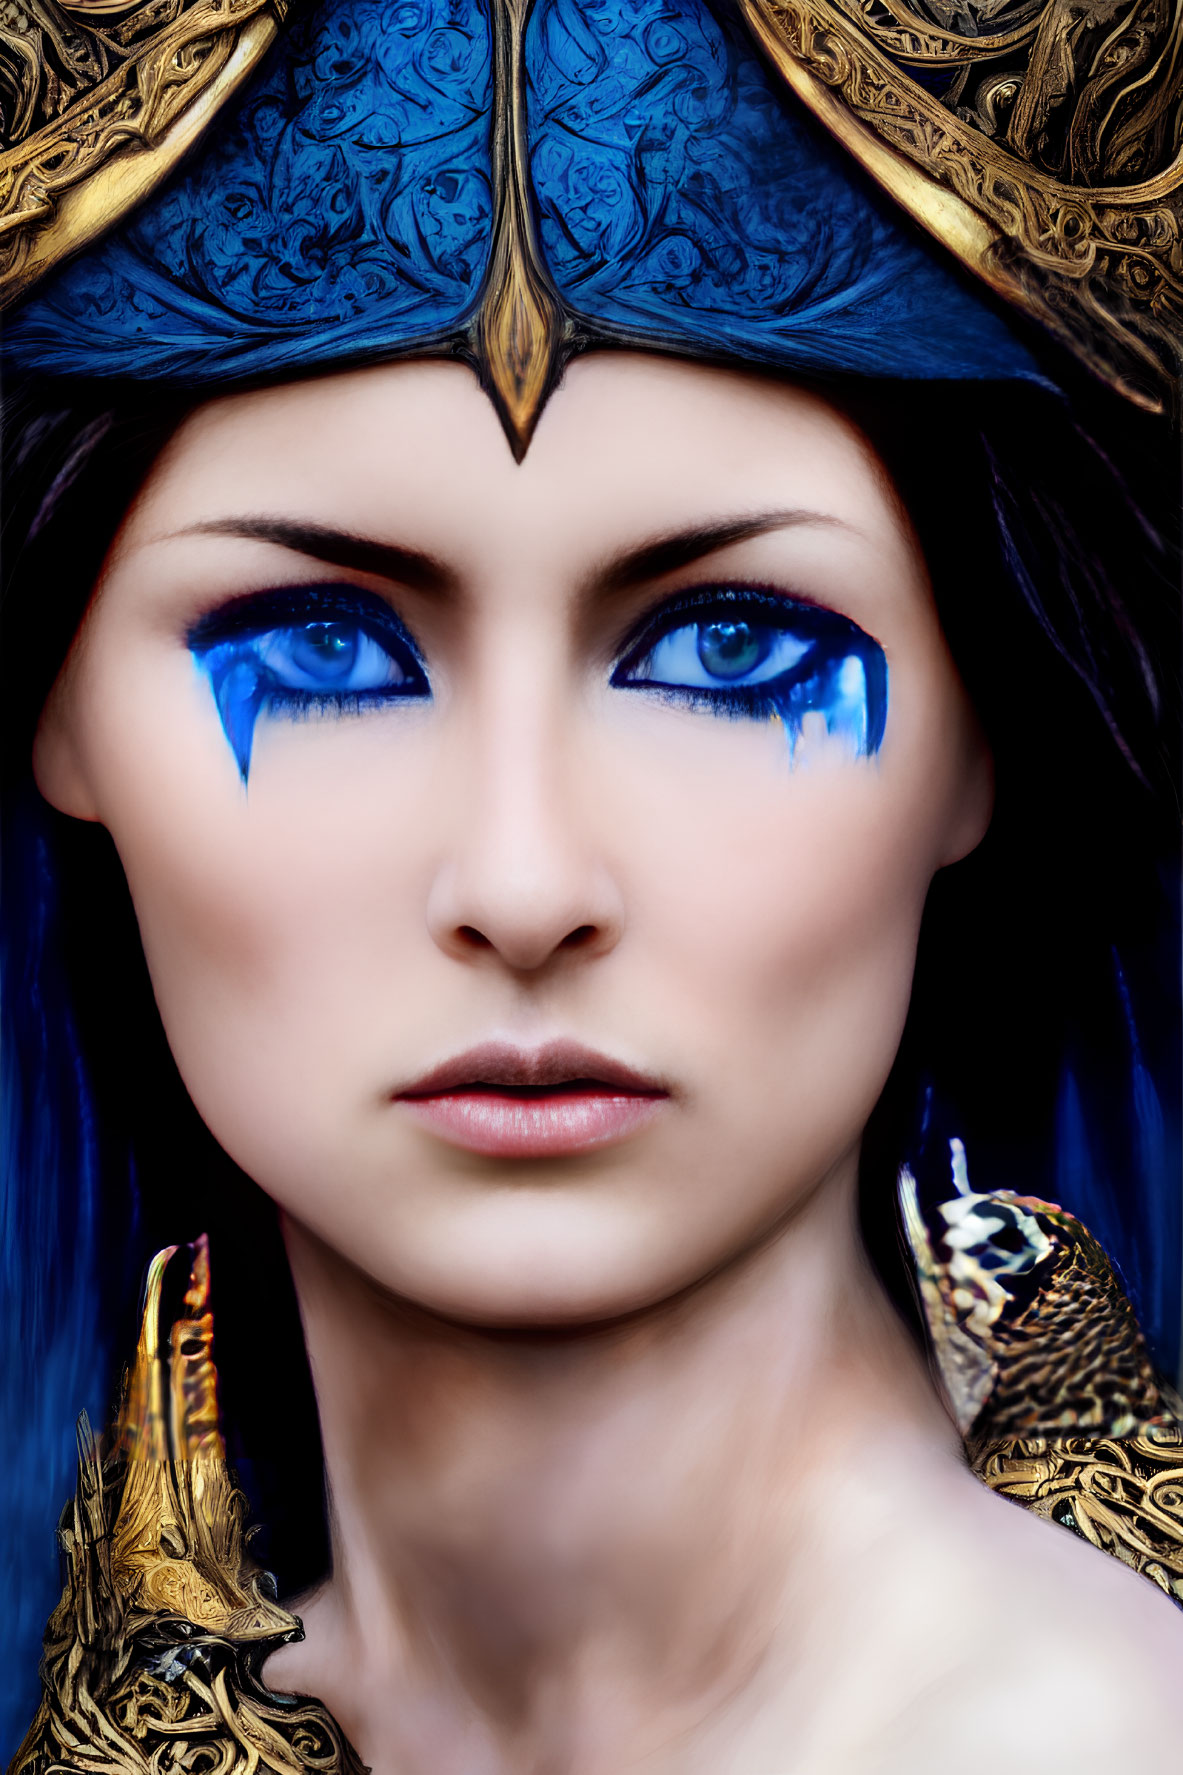 Woman with Striking Blue Makeup and Golden Headpiece Portrait